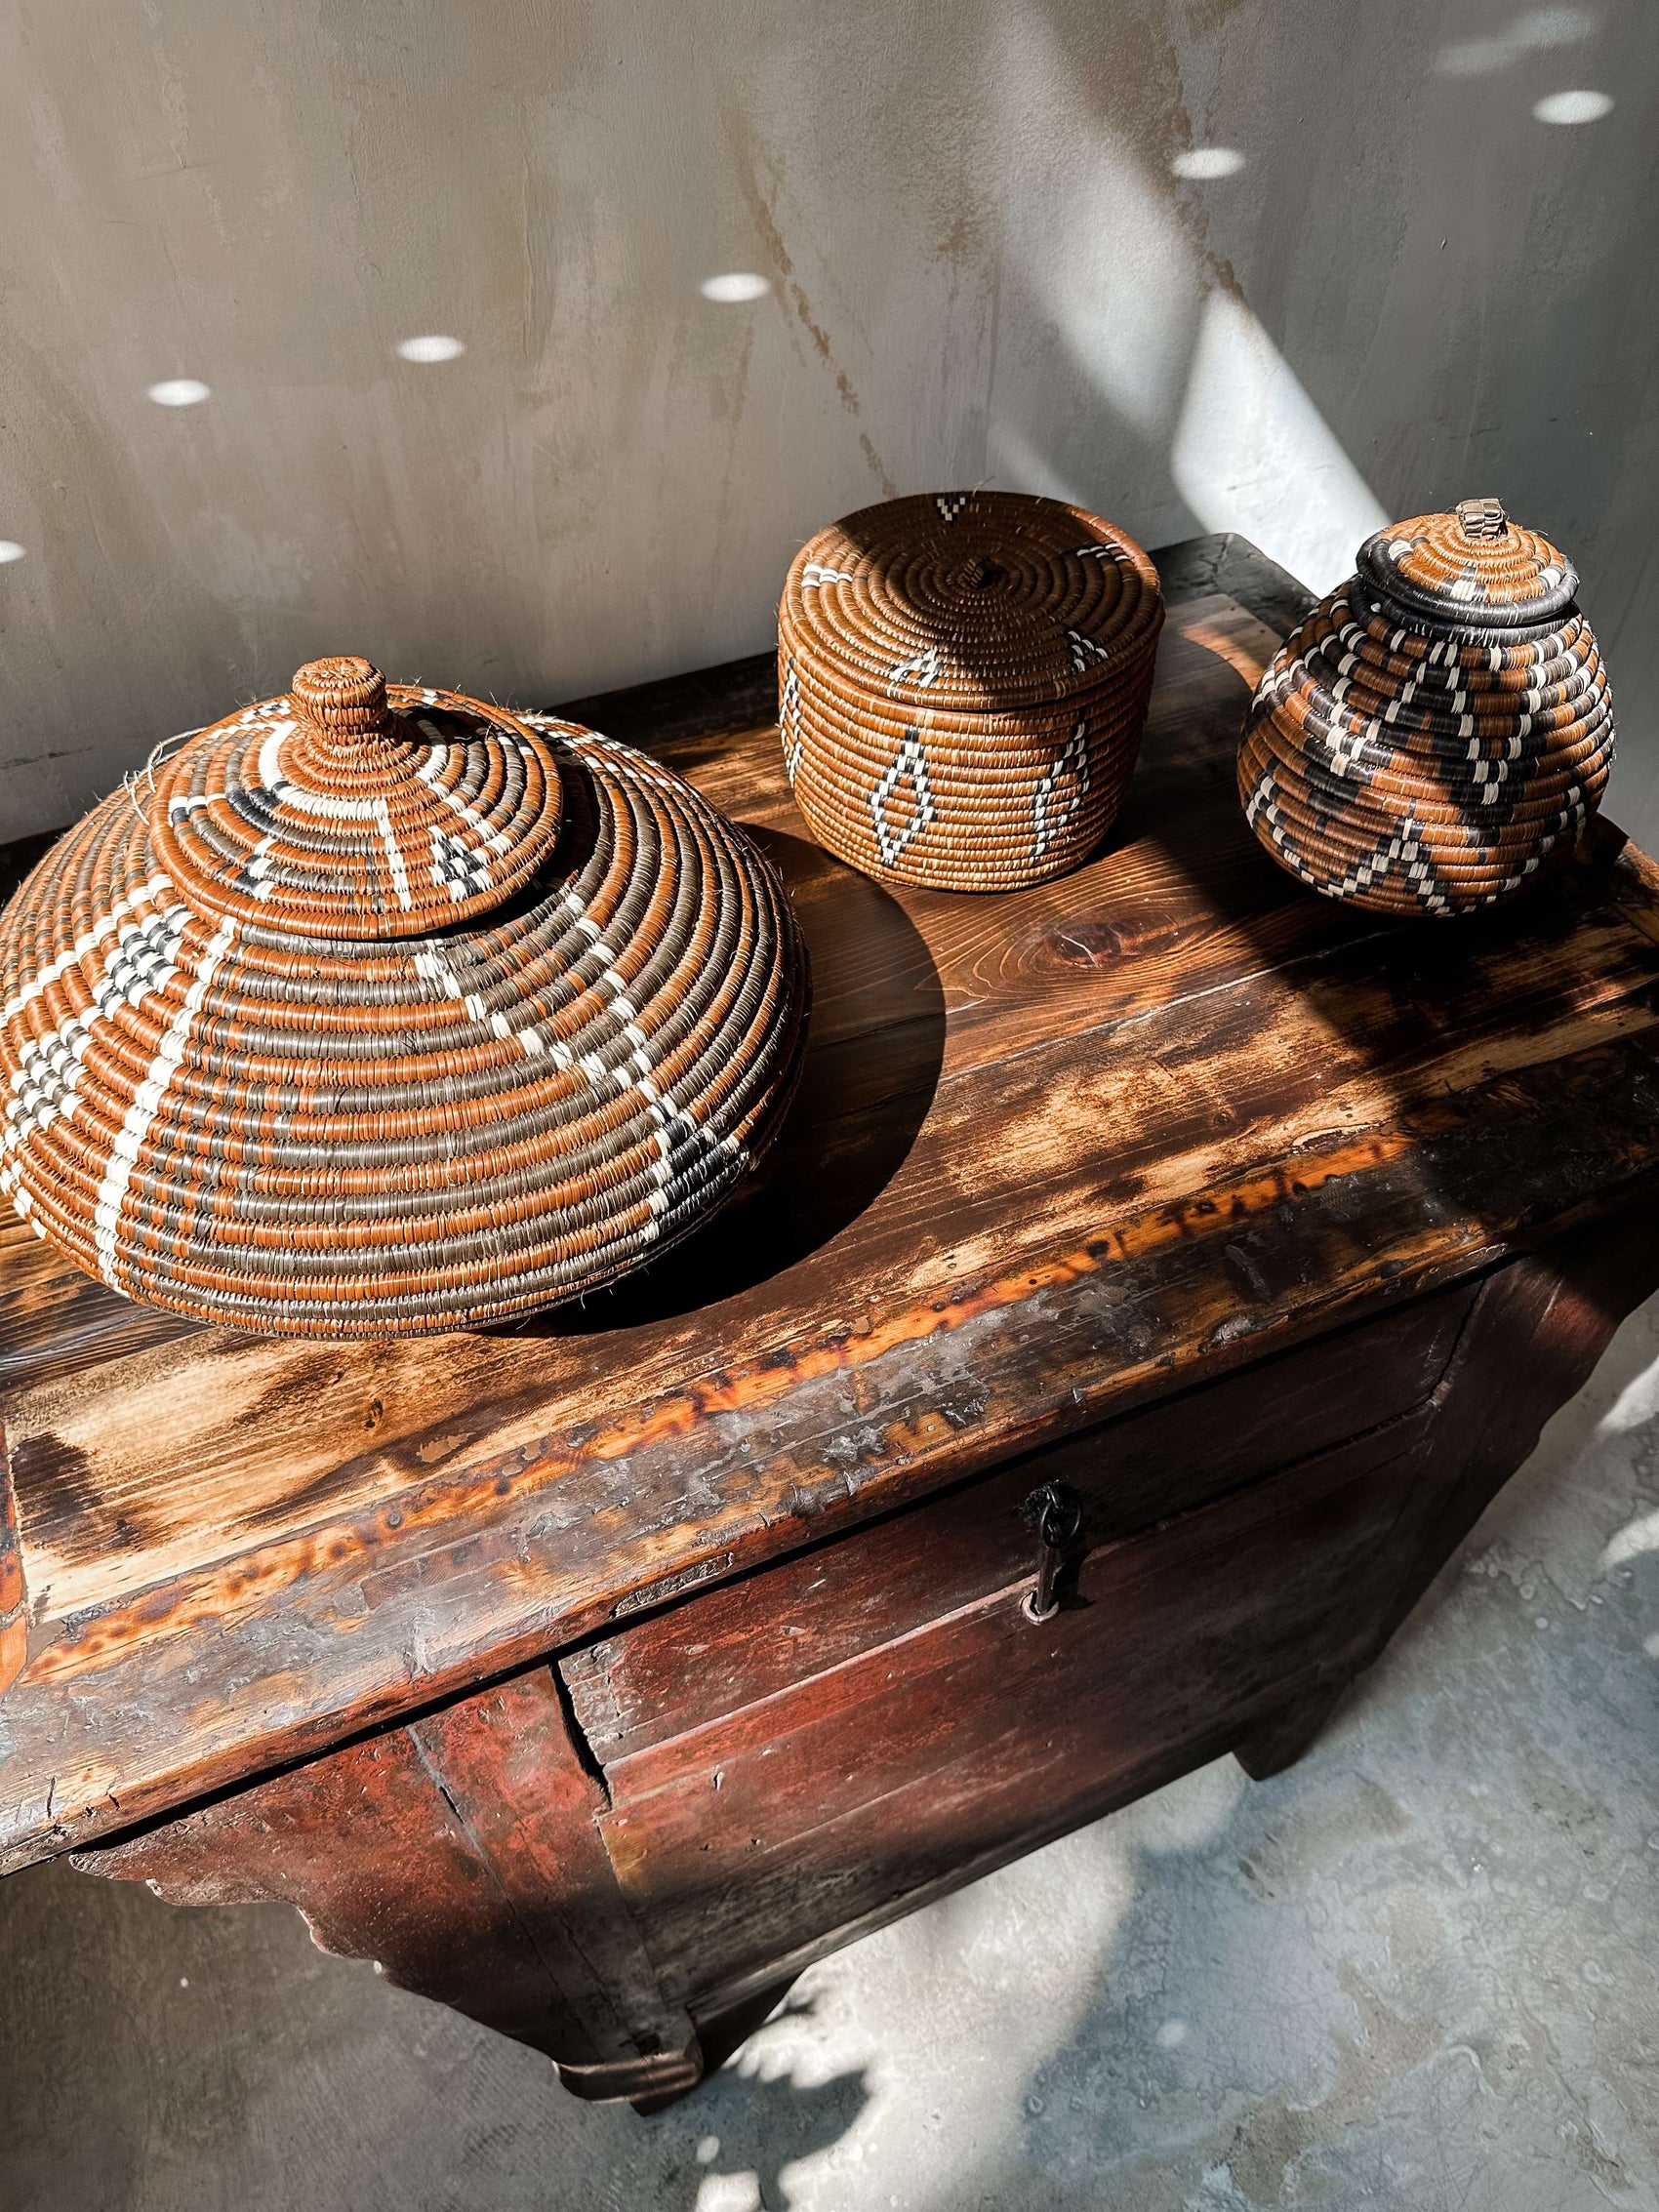 baskets & tables from South Africa